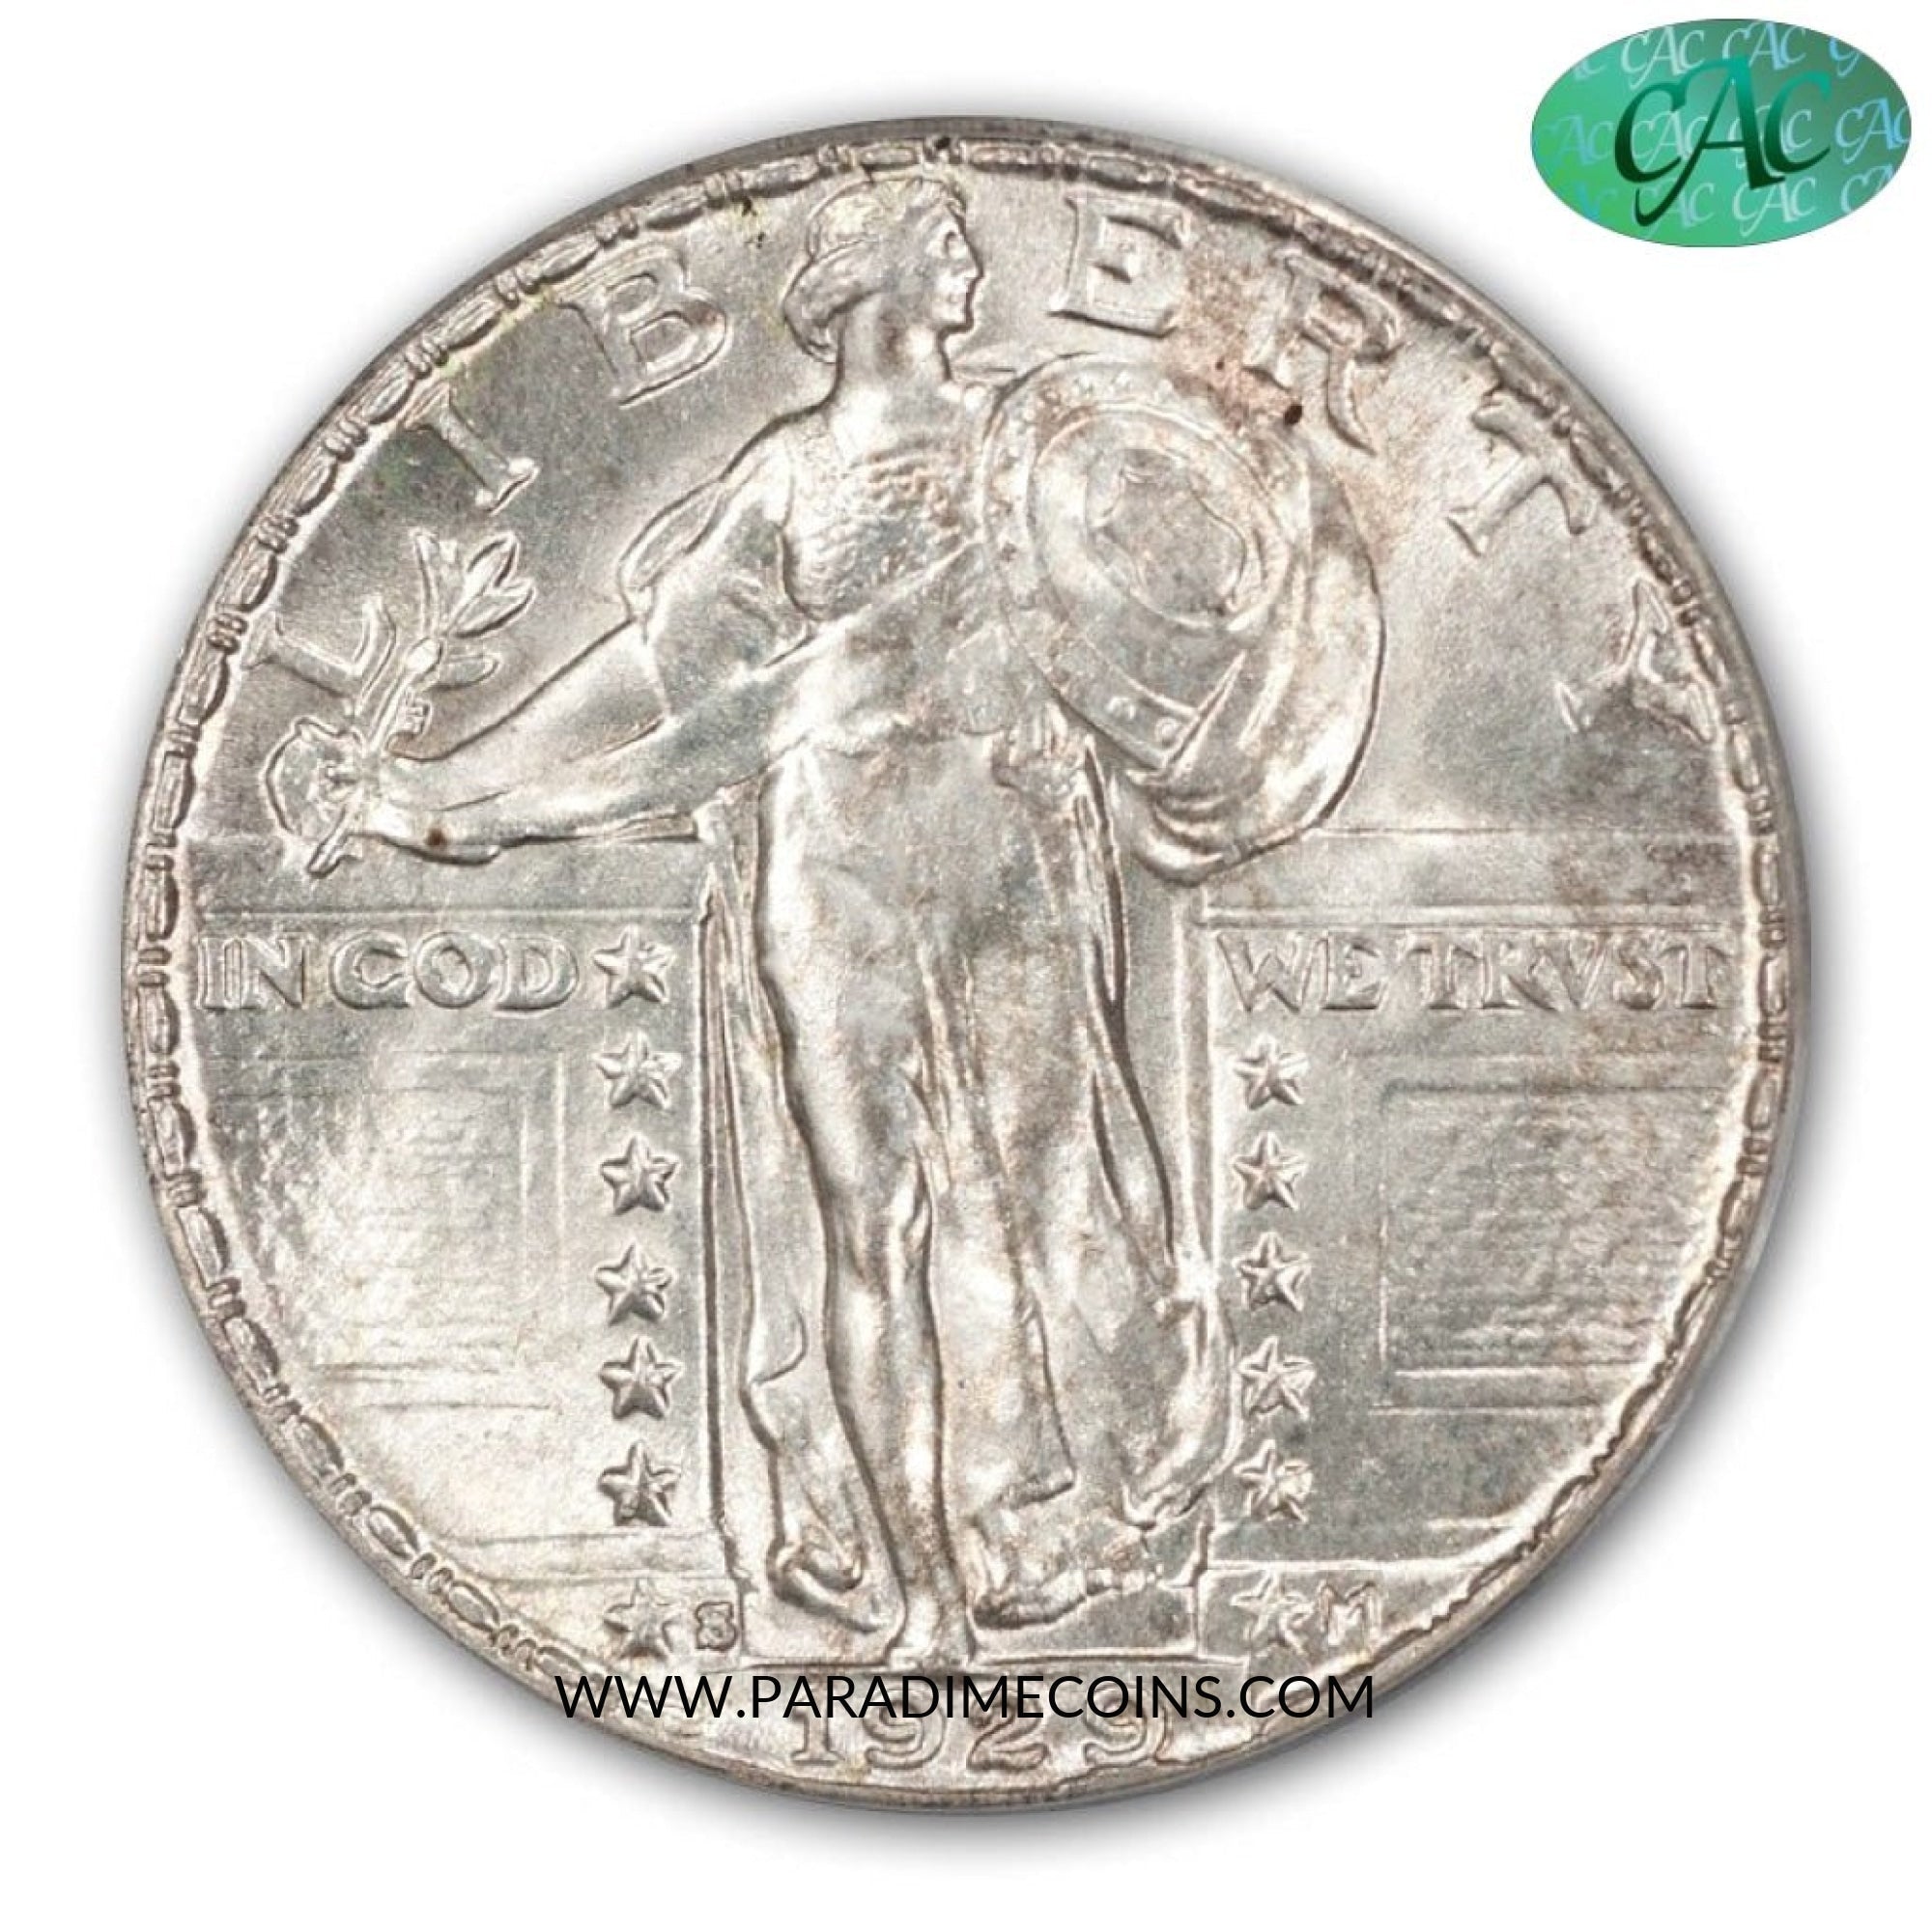 1929-S 25C MS65 PCGS CAC - Paradime Coins | PCGS NGC CACG CAC Rare US Numismatic Coins For Sale